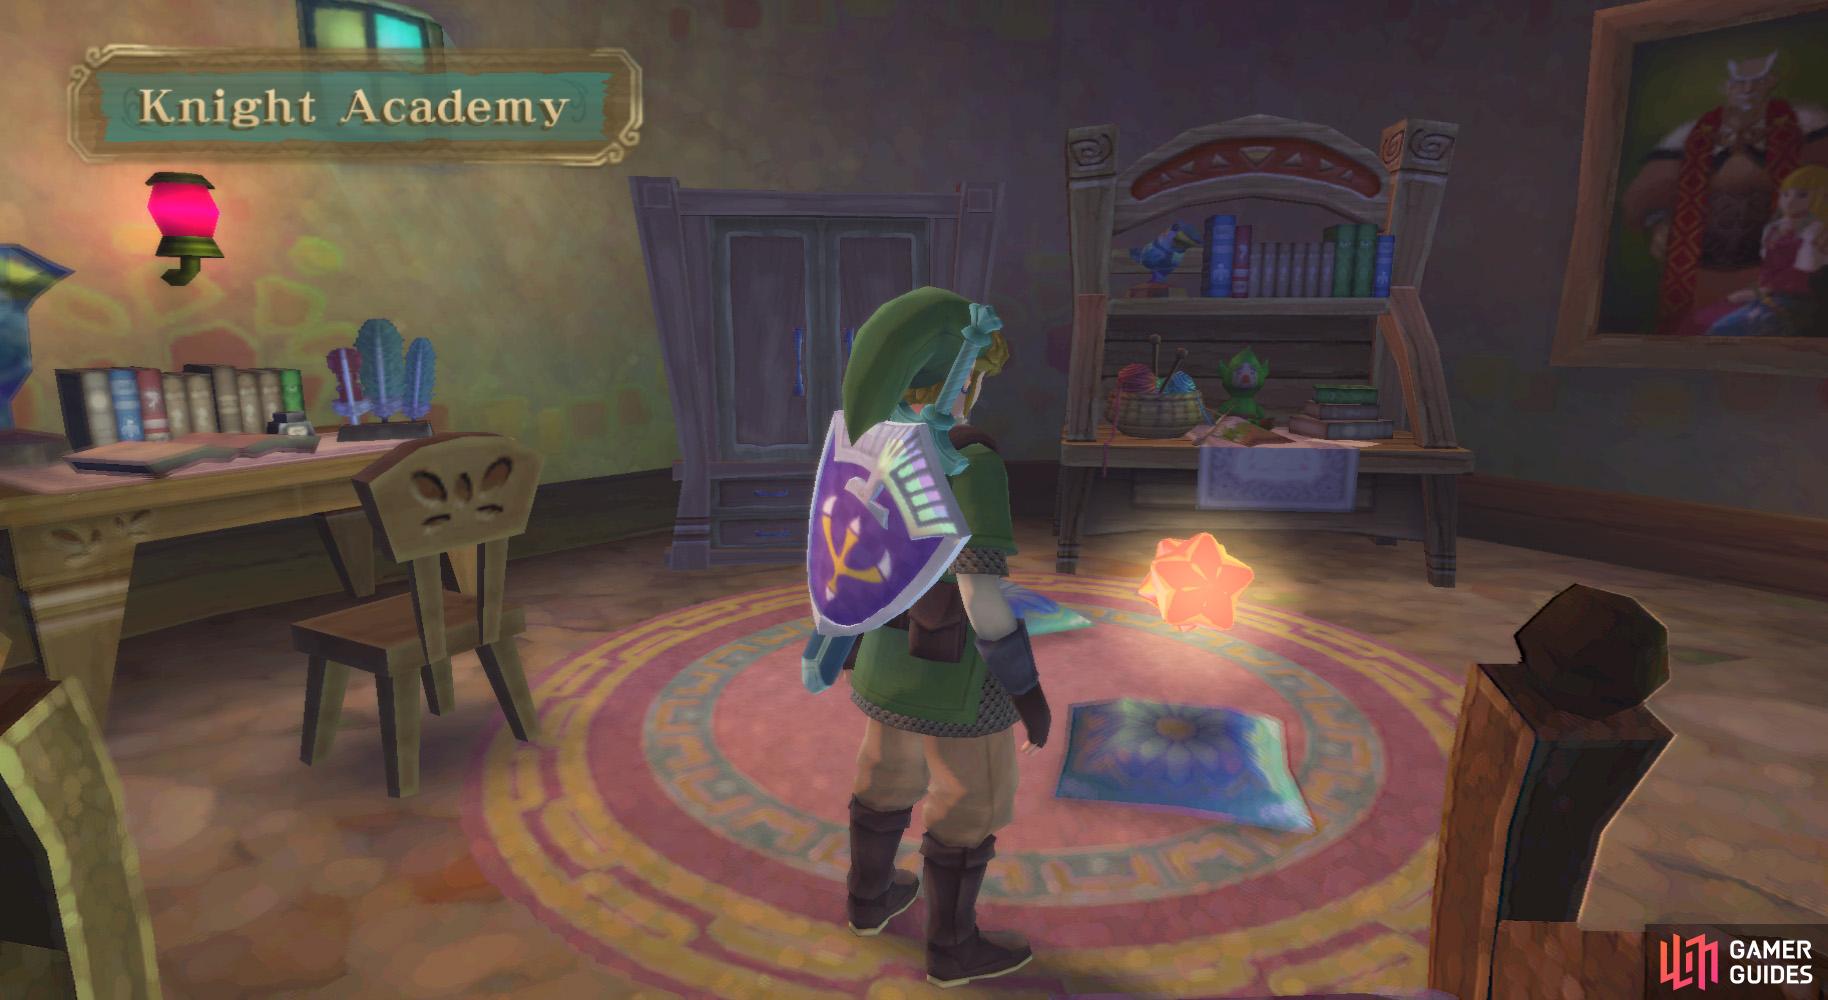 12: Inside Zeldas room in the Knight Academy. Use the Clawshots to climb into the chimney on the roof.